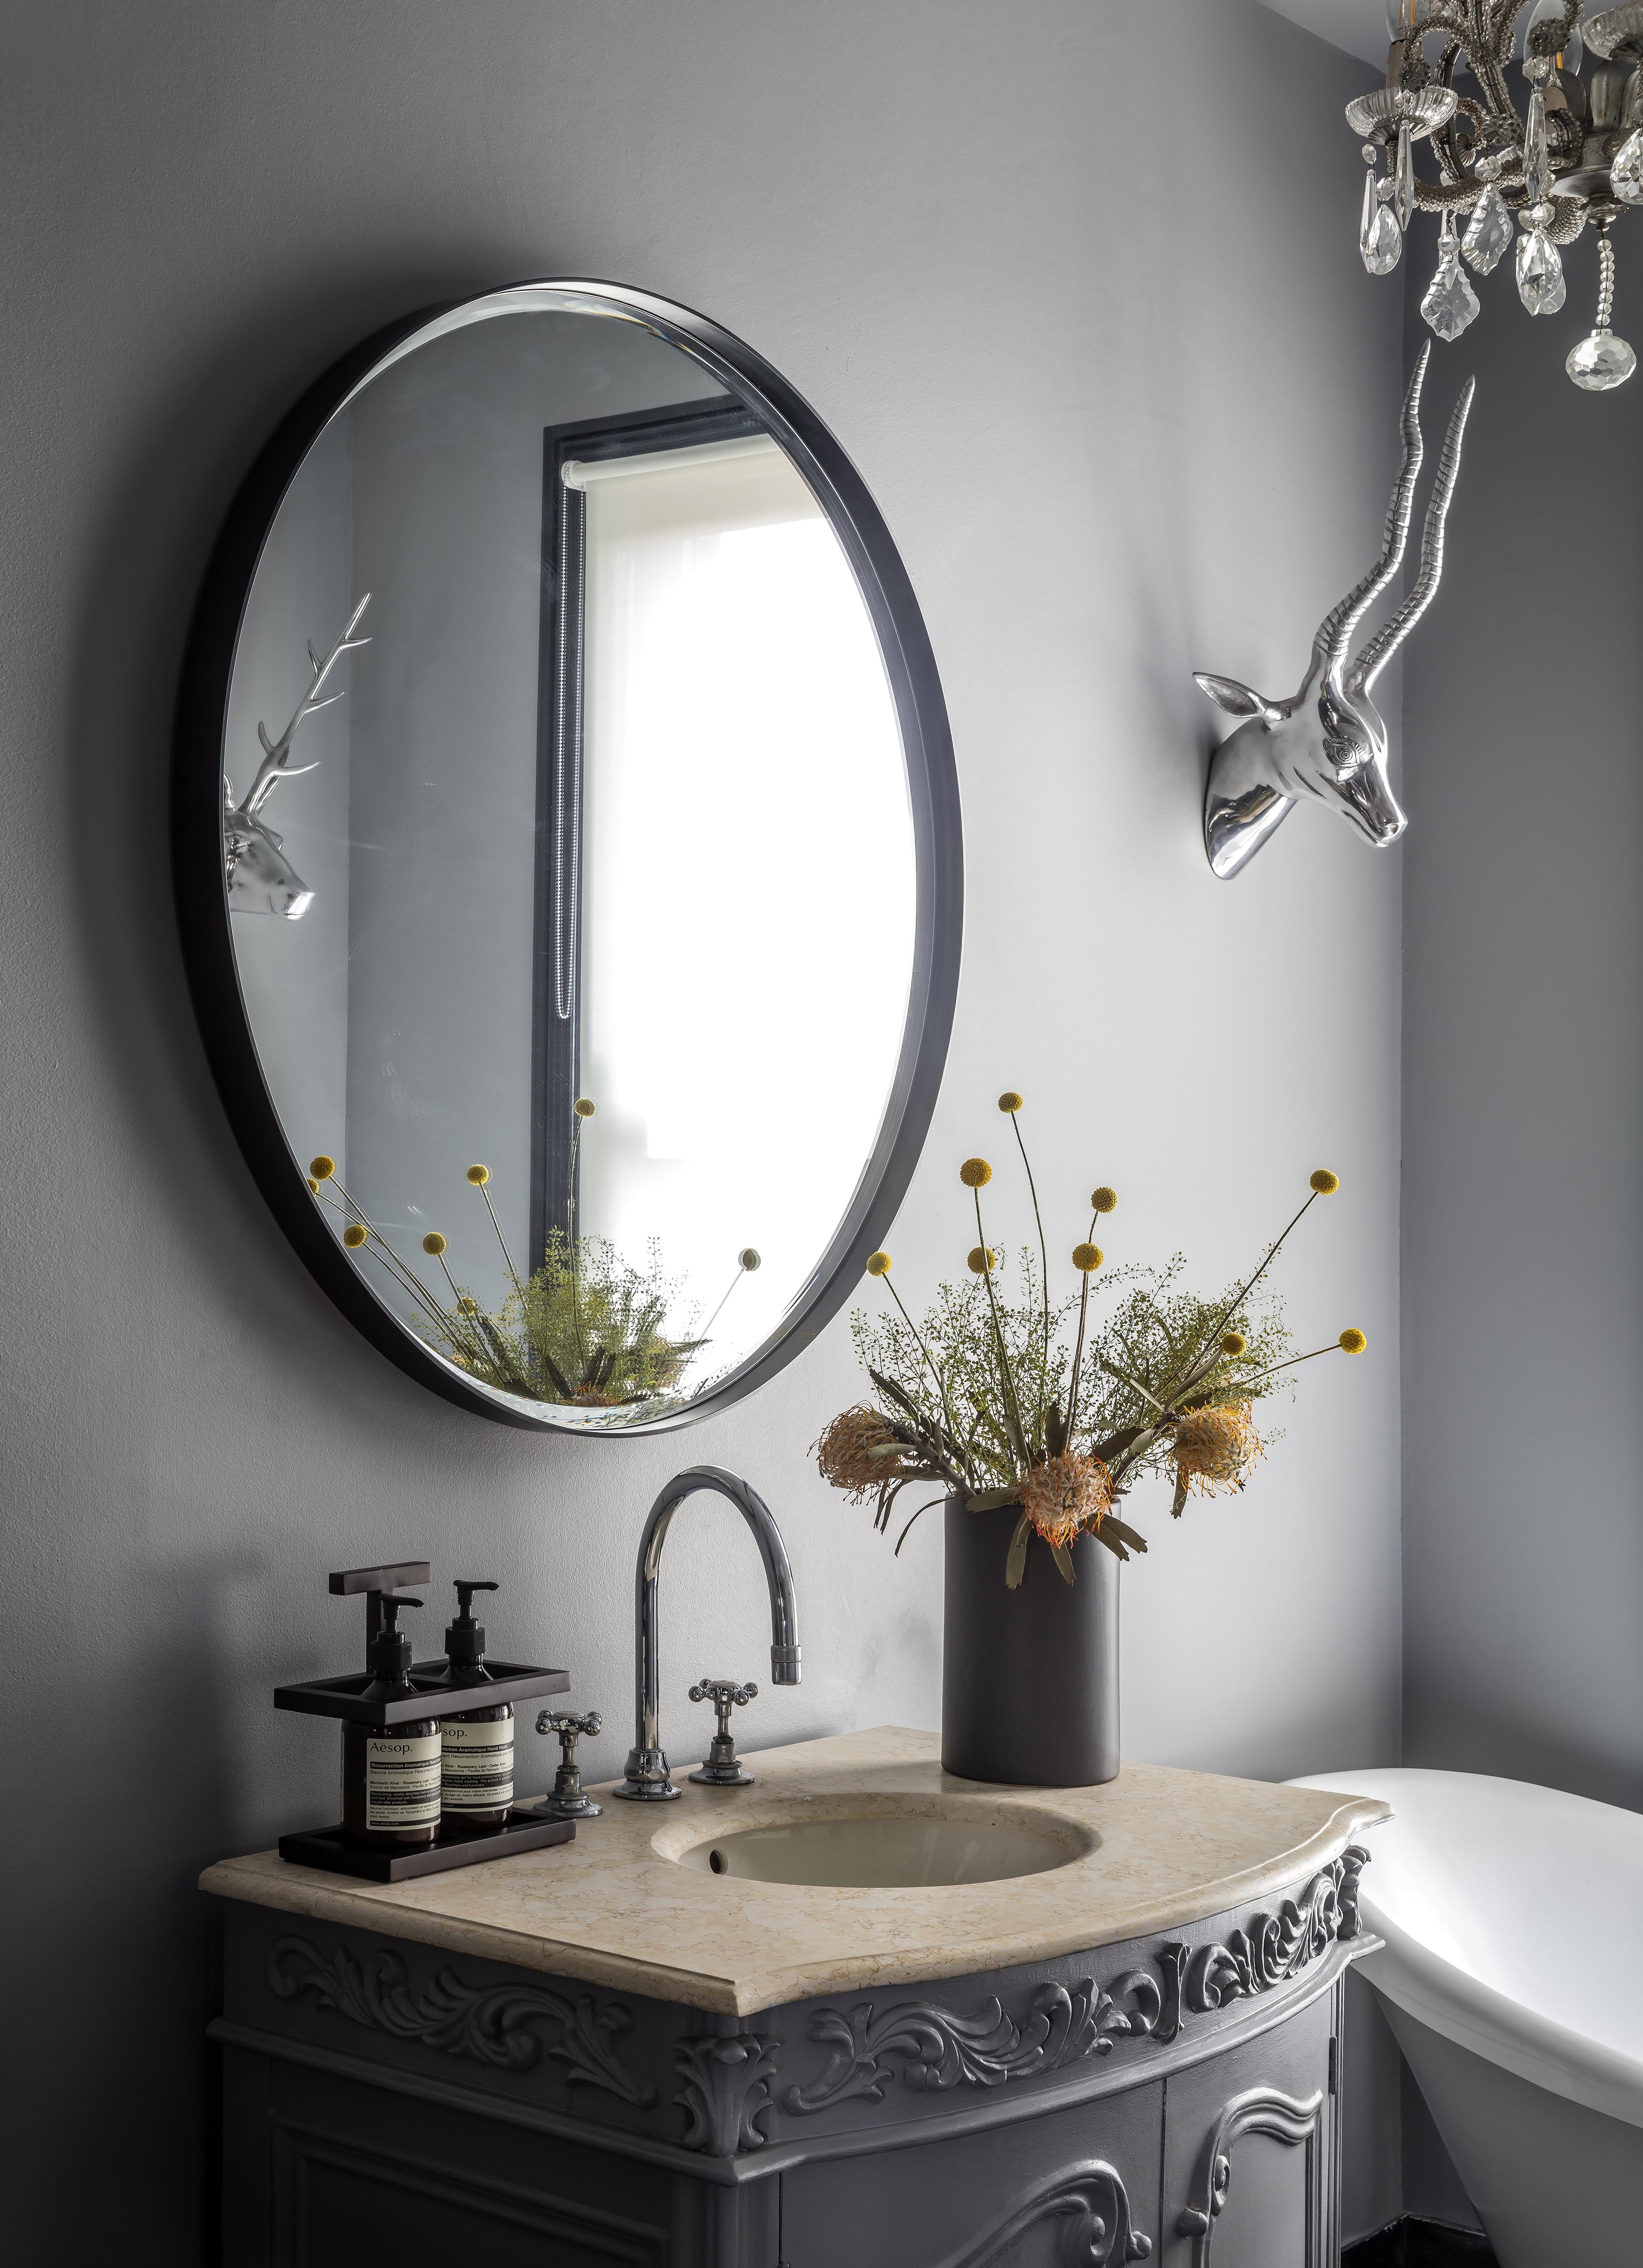 Mirrors are sometimes overrated with lack of design and personality. Eros defies these ideas with a antique-style mirror and a delicate, beveled Art Deco frame available in solid brass as well as steel powder-coated. Designed to be displayed in